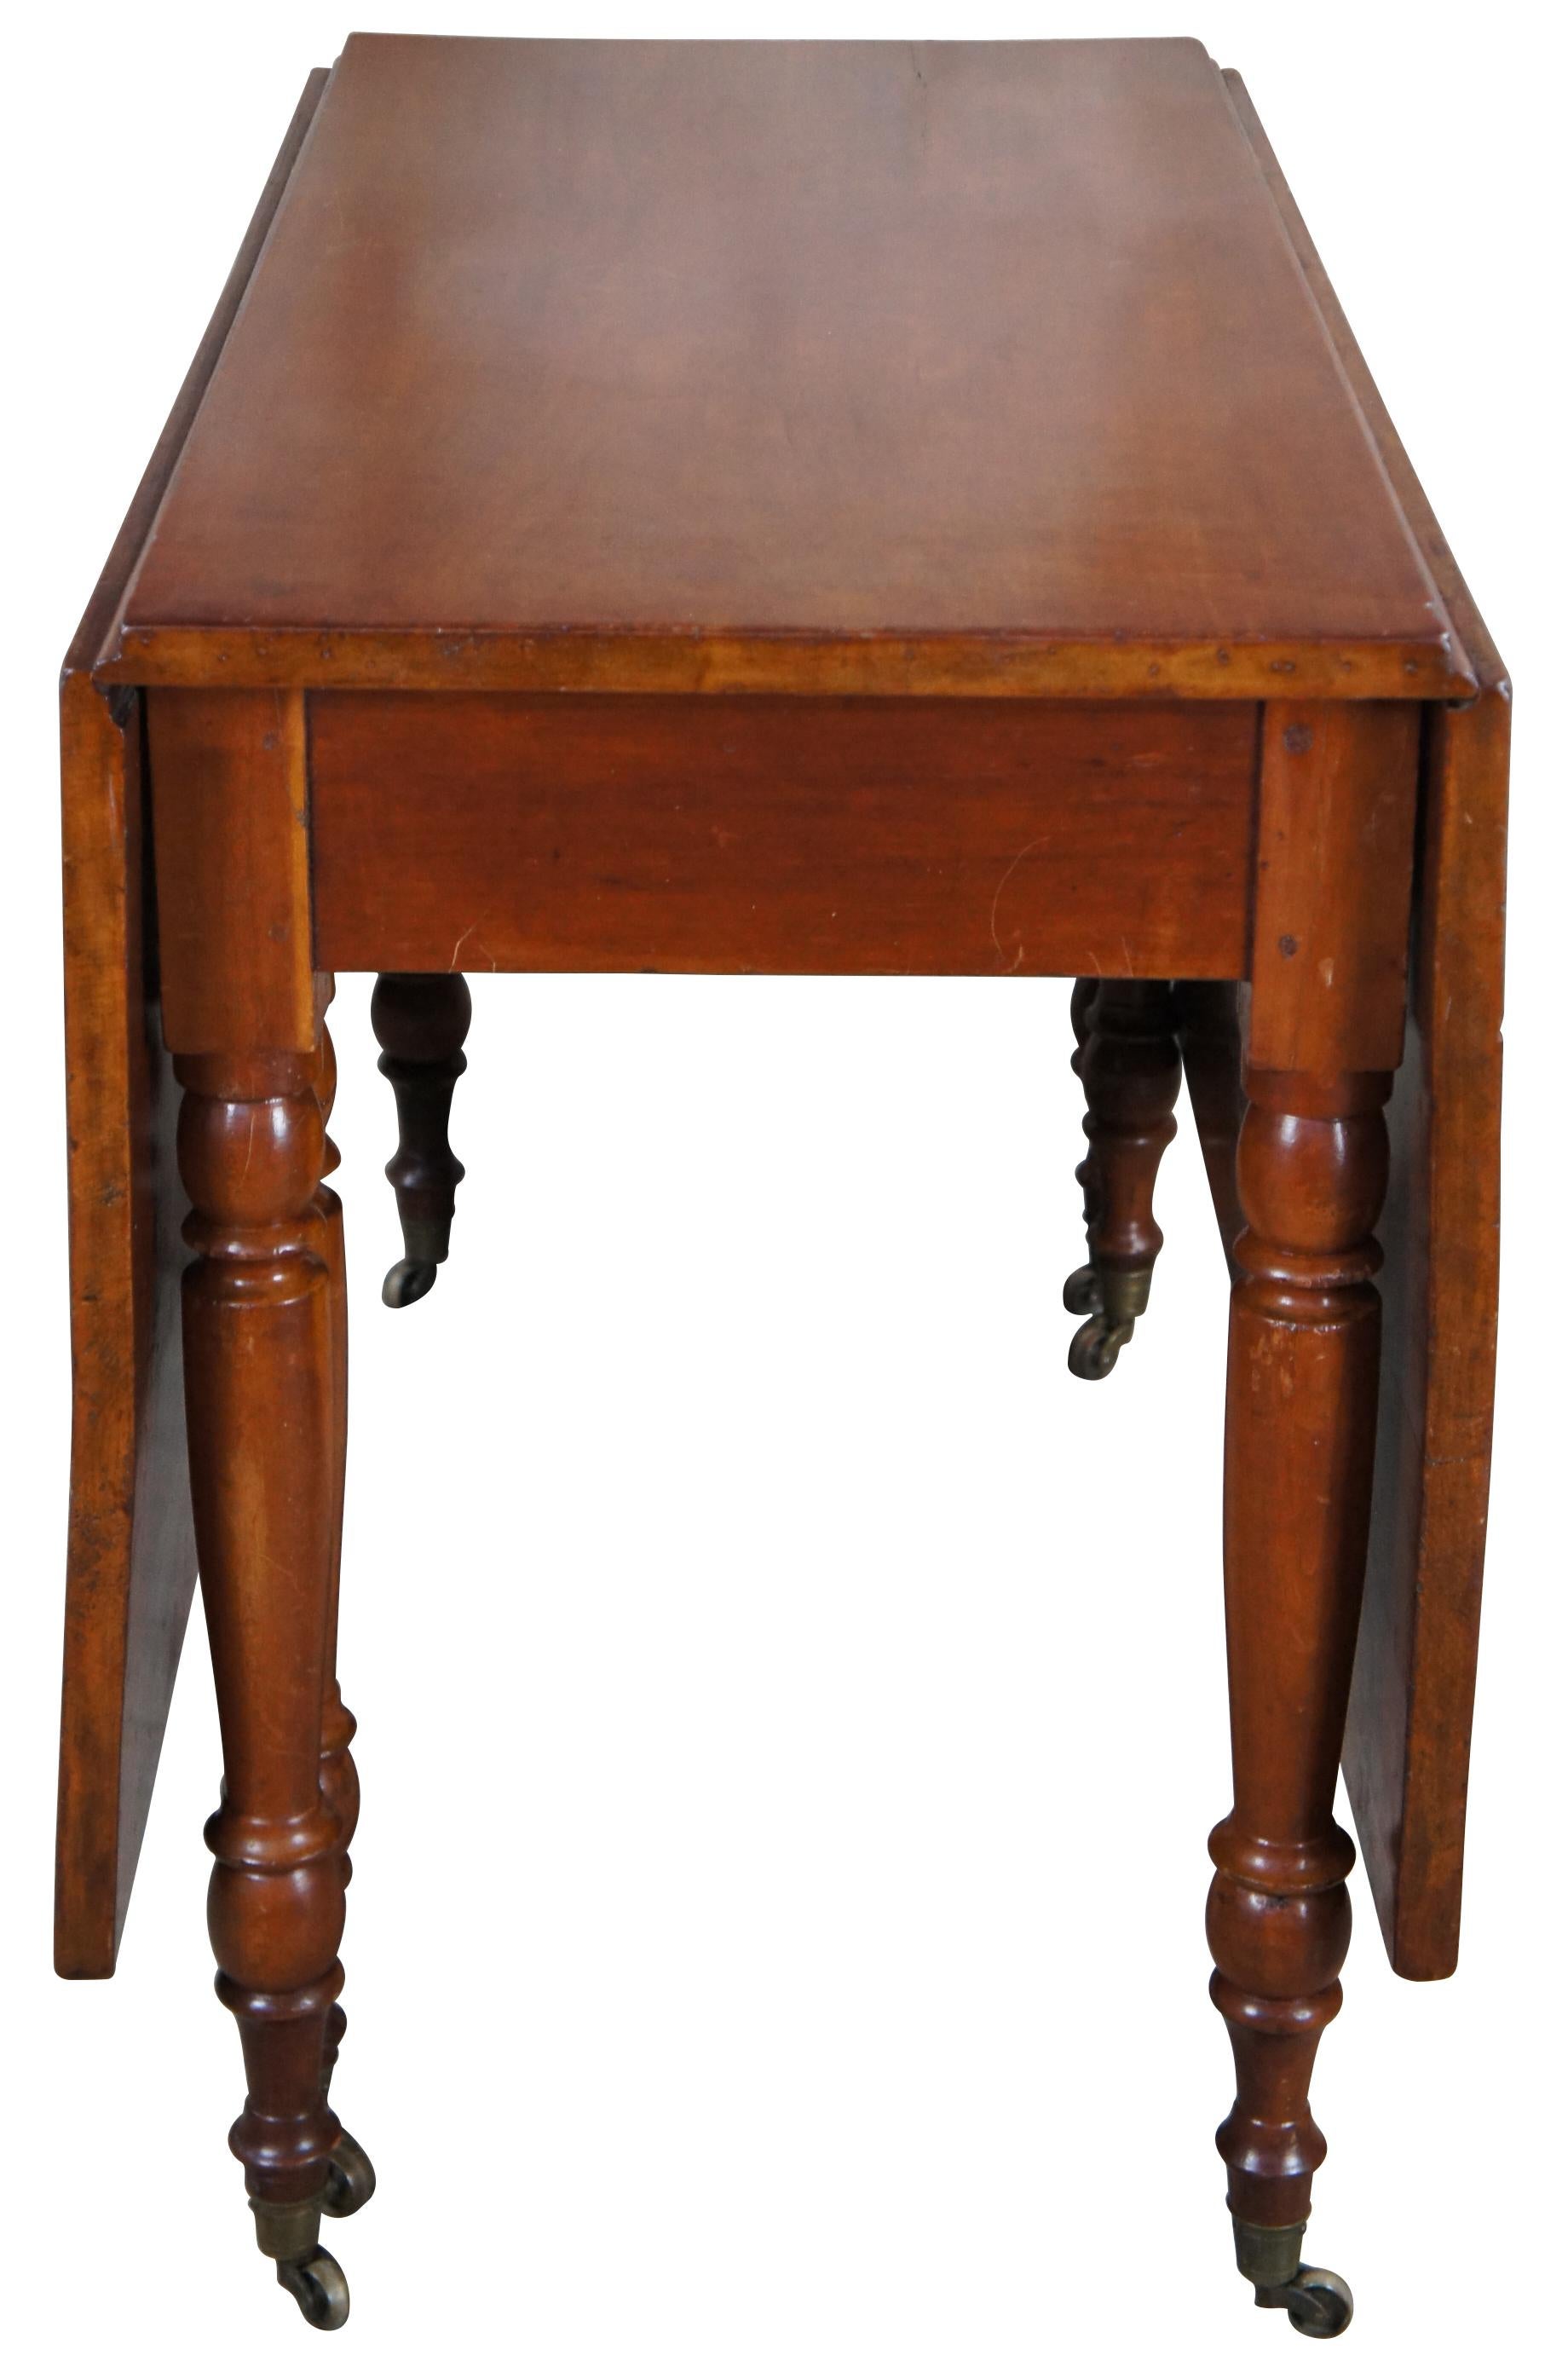 American antique 19th century dining or console table. Made from solid cherry with long drop leaves and tuned legs leading to brass casters. 

Measures: 44